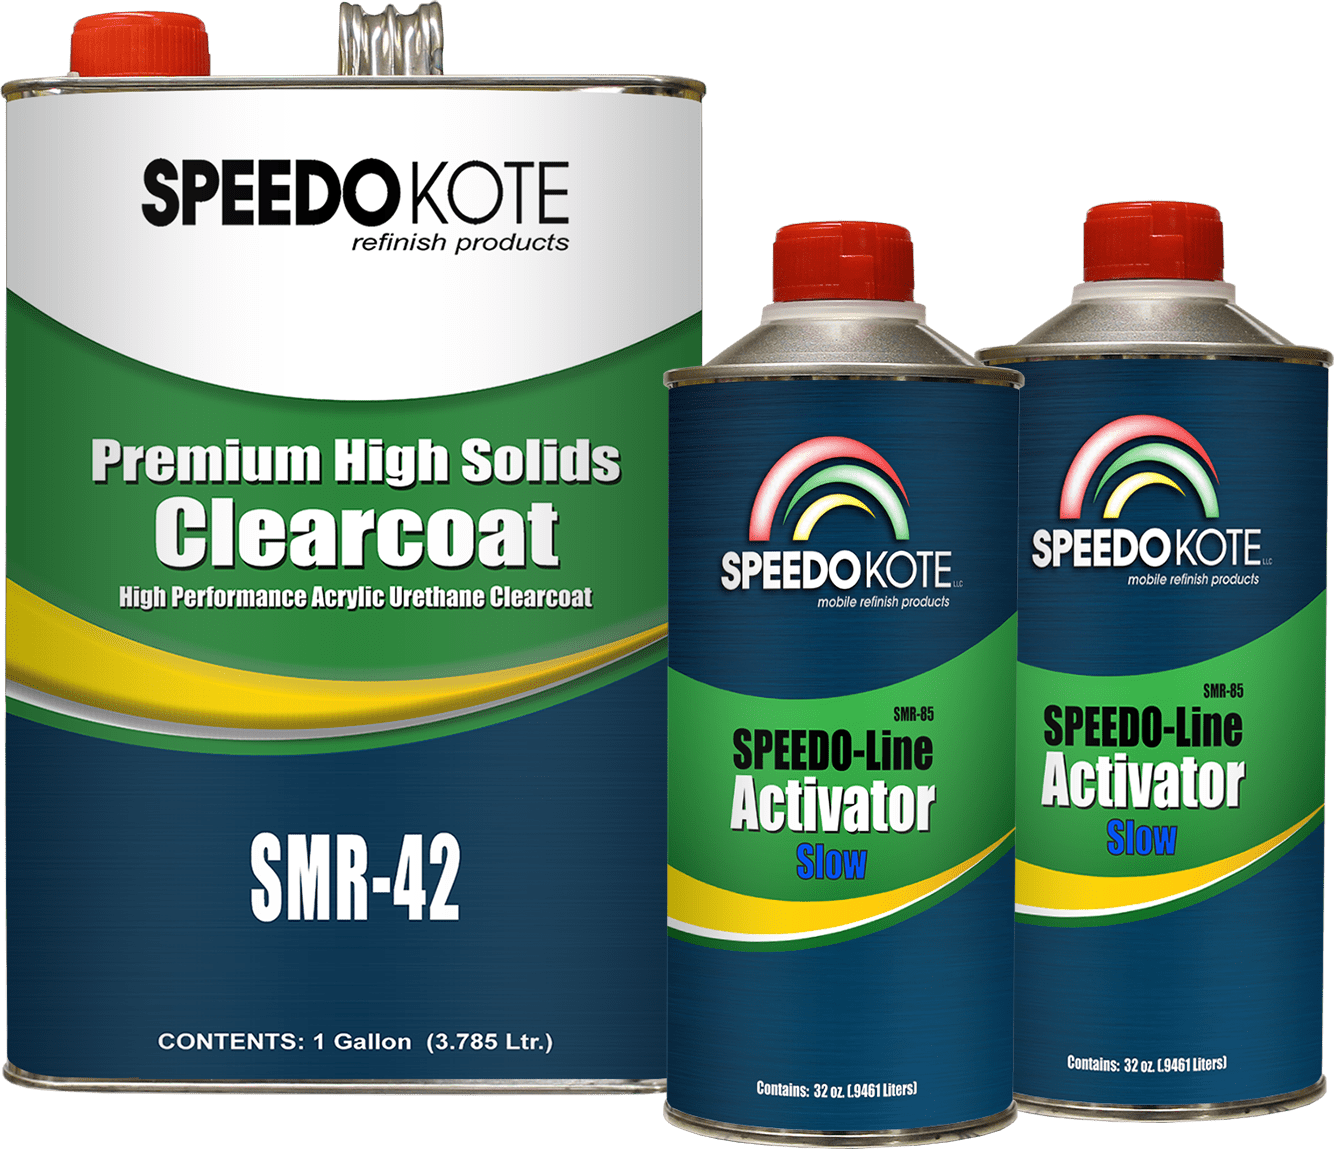 Slow warm. Clearcoat. Acrylic Clearcoat Premium. Clear Coat. Acrylic Clearcoat Premium Design.